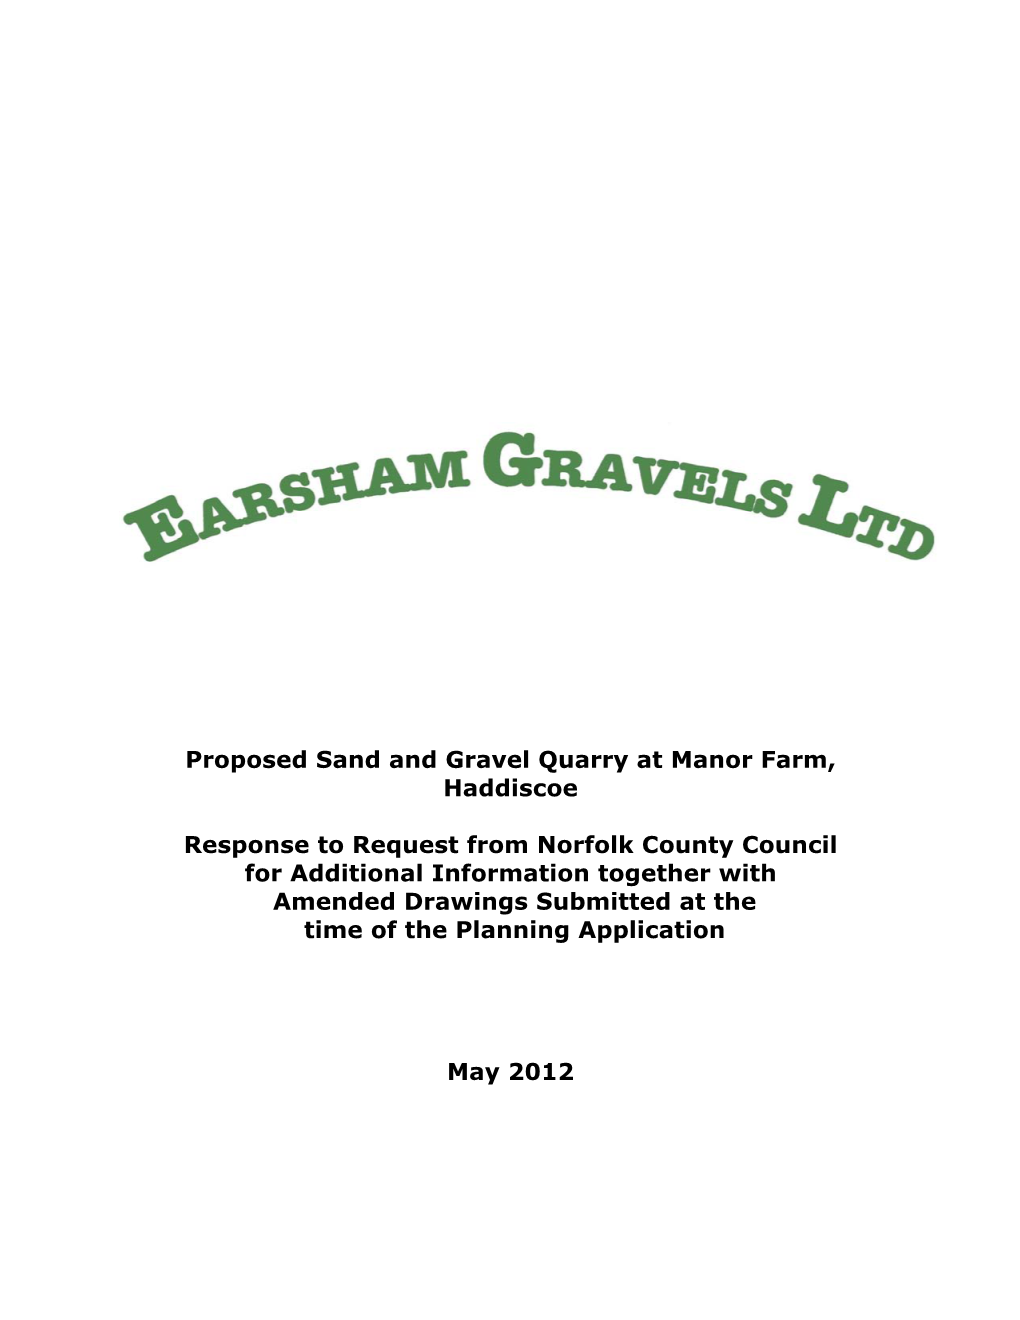 Proposed Sand and Gravel Quarry at Manor Farm, Haddiscoe Response to Request from Norfolk County Council for Additional Informat